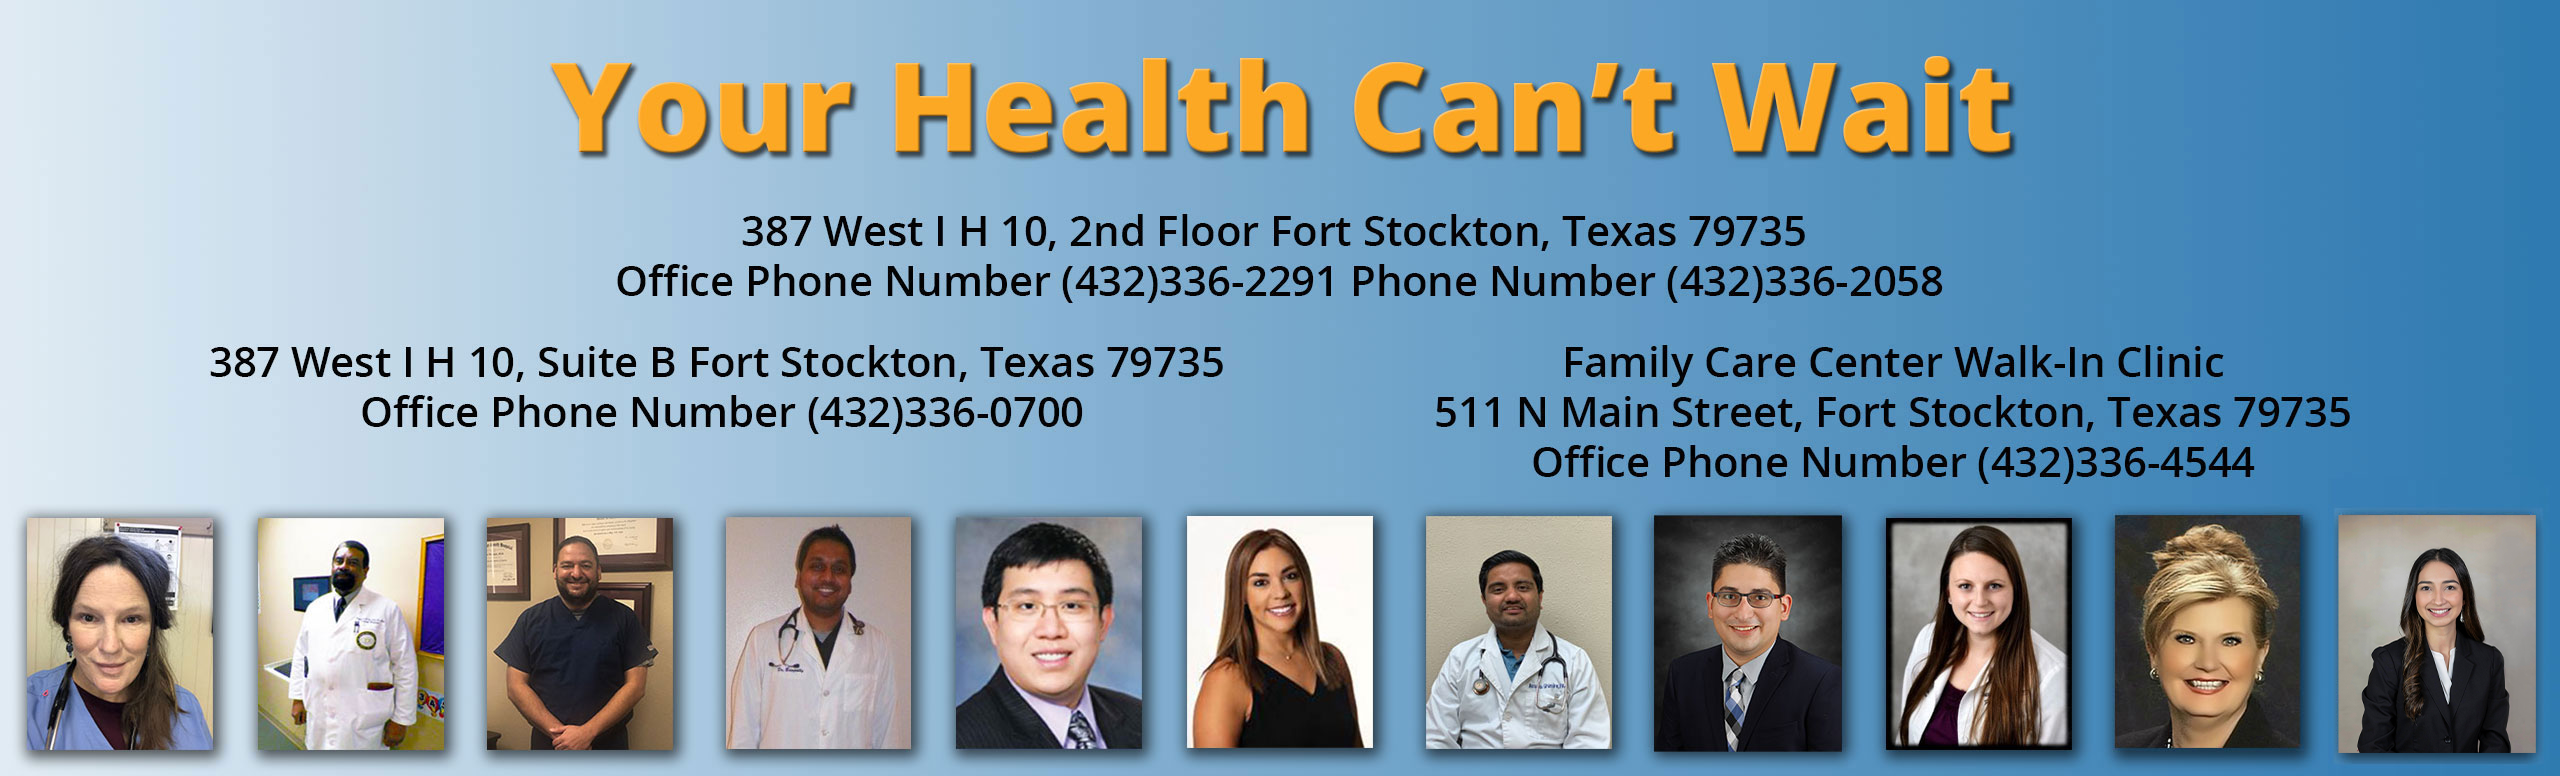 Banner picture of our Physicians (Males and Females). Banner says:
Your Health Can't Wait
387 West I H 10, 2nd Floor Fort Stockton, Texas 79735

 Office Phone Number (432)336-2291 Phone Number (432)336-2058

 

387 West I H 10, Suite B Fort Stockton, Texas 79735 Office Phone Number (432)336-0700

 

Family Care Center Walk-In Clinic

511 N Main Street, Fort Stockton, Texas 79735

Office Phone Number (432)336-4544